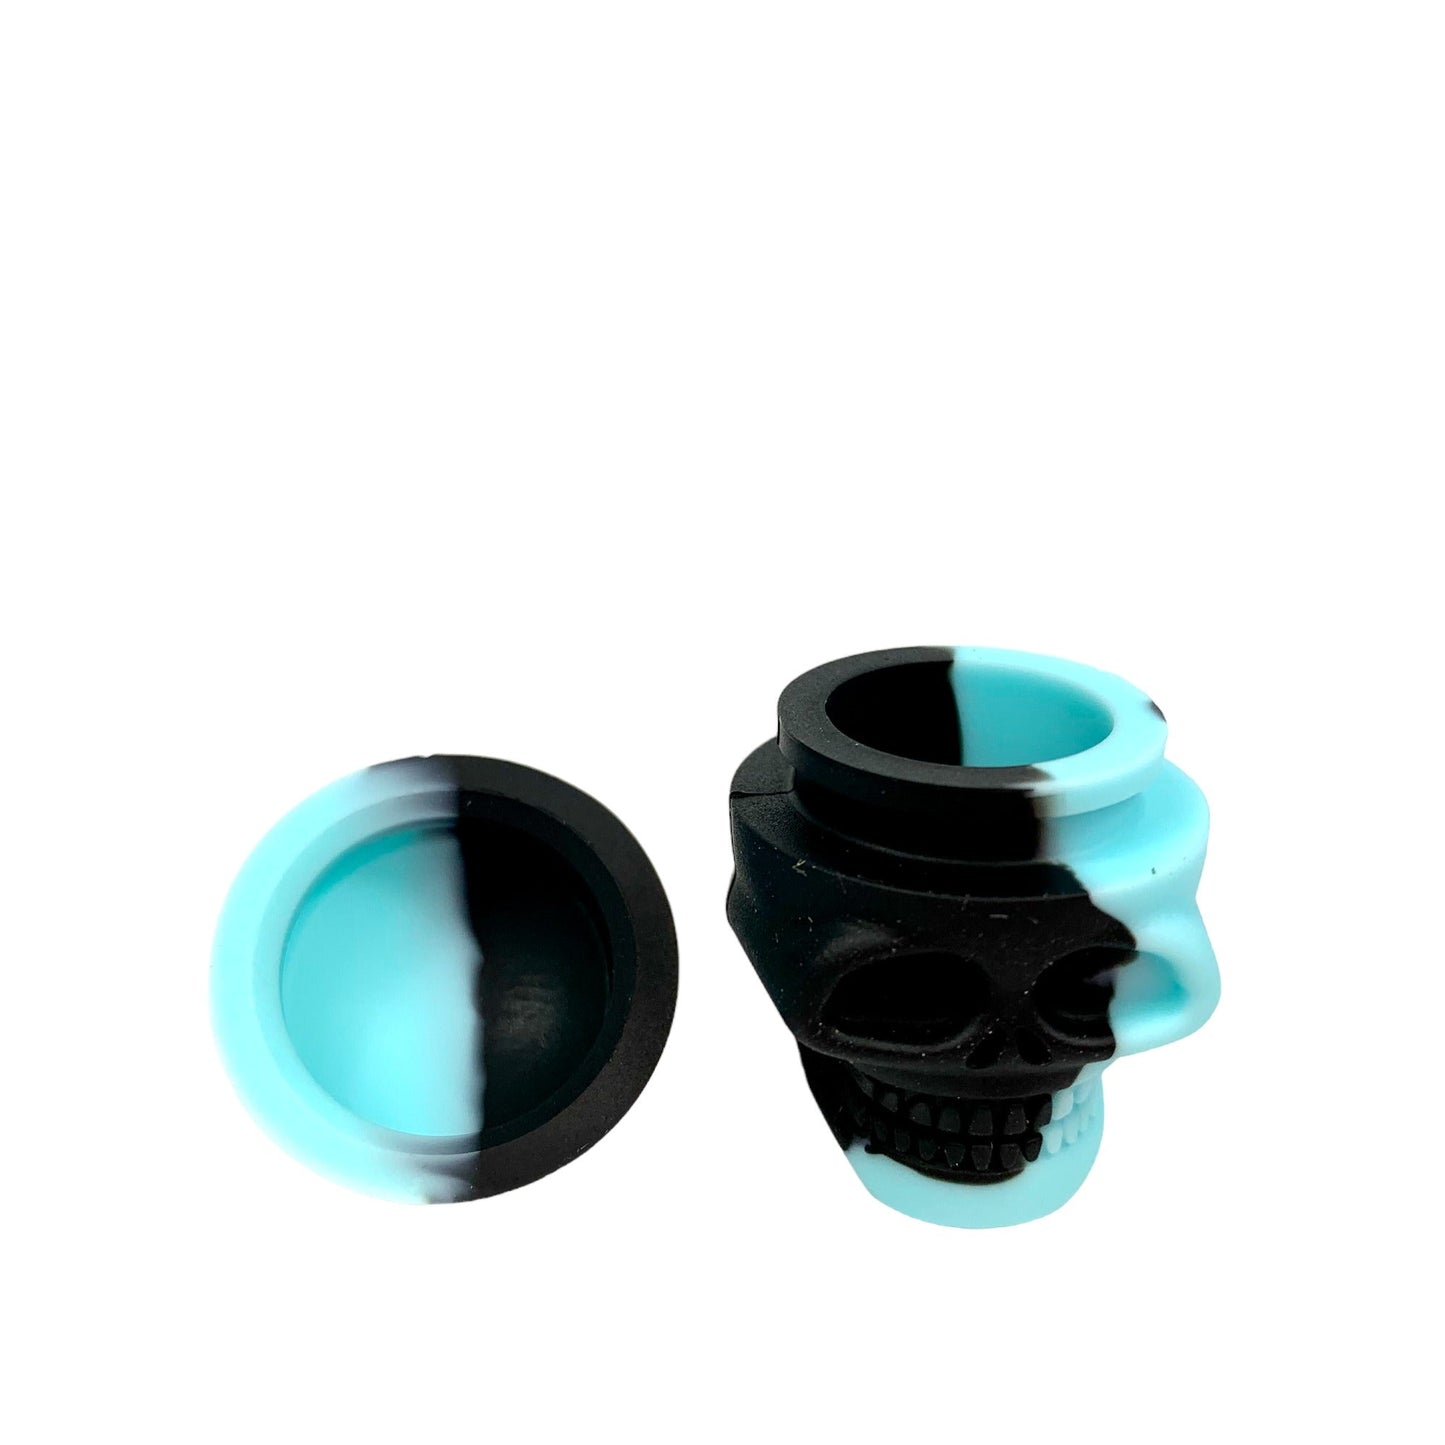 Silicone Skull Extract Container Small - The Bong Baron